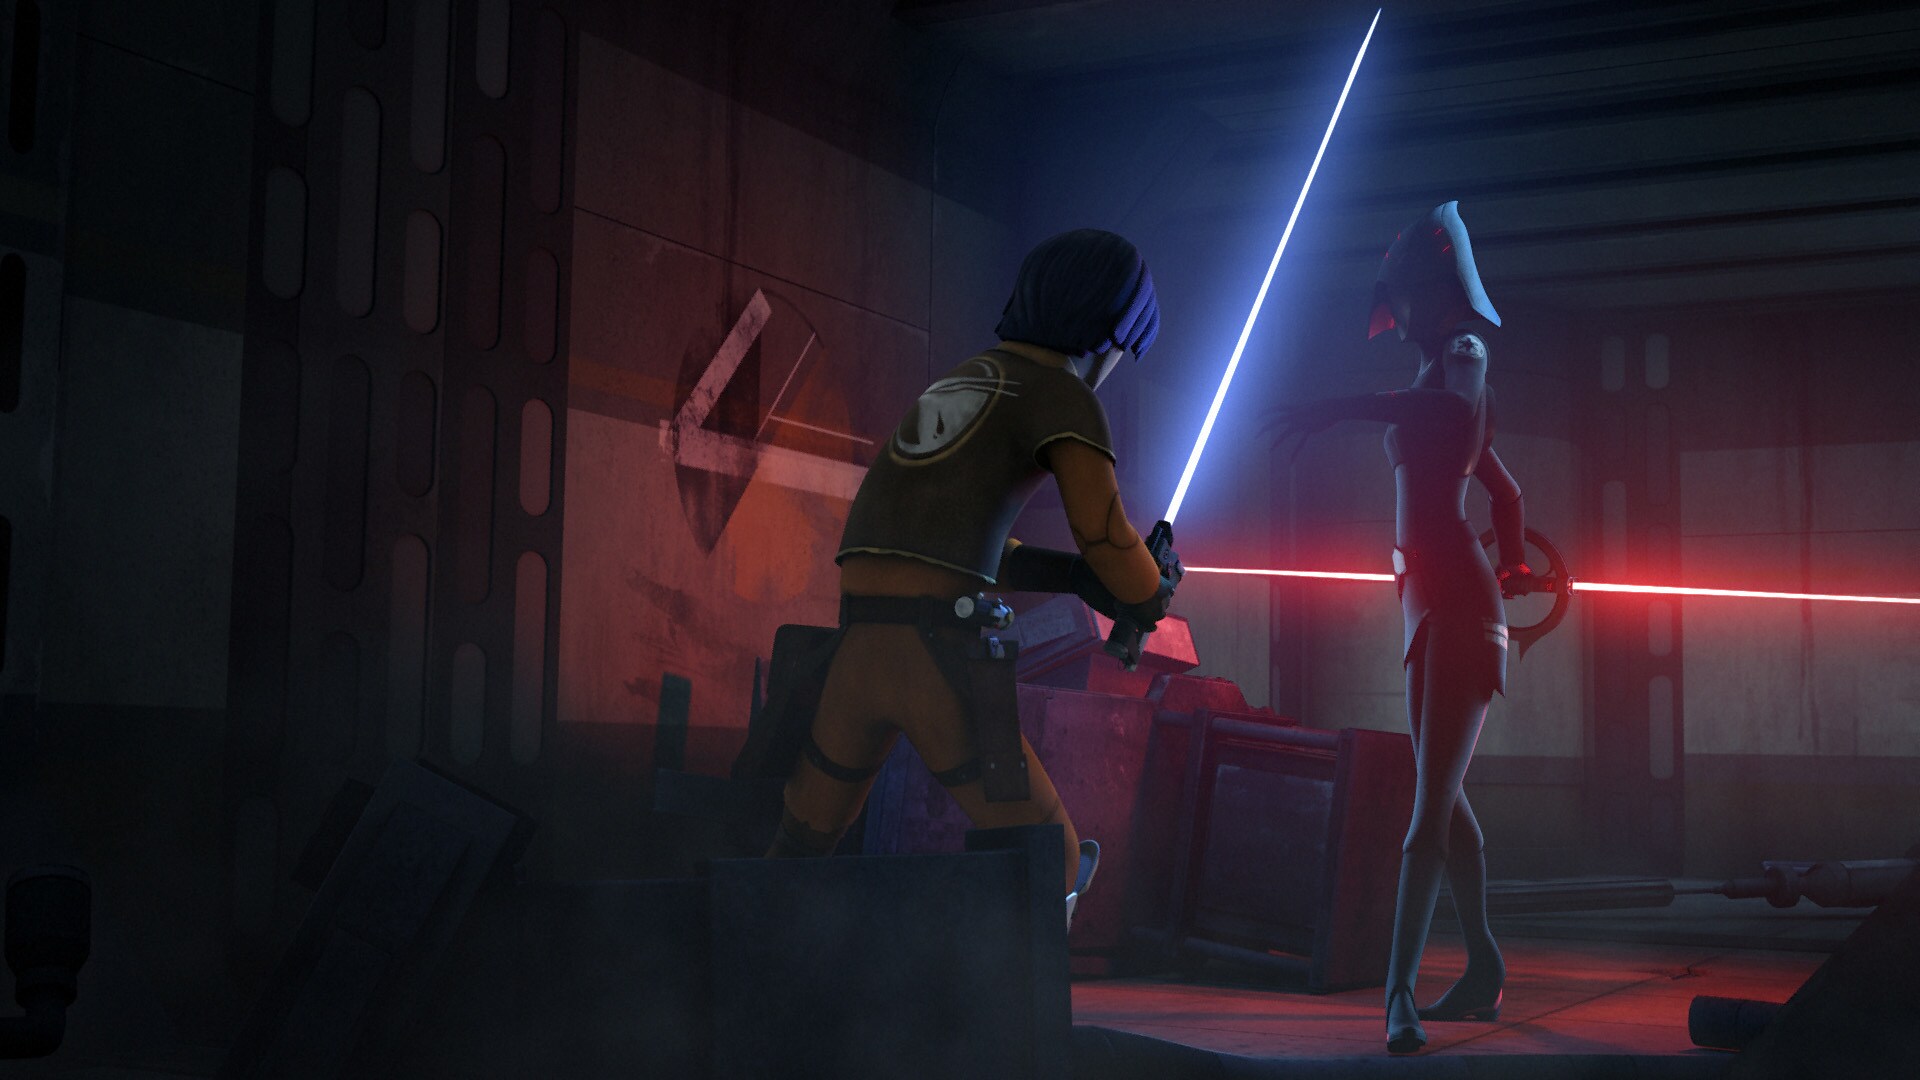 Ezra ignites his lightsaber while Sabine holds off the seeker droids. Both are overpowered and ma...